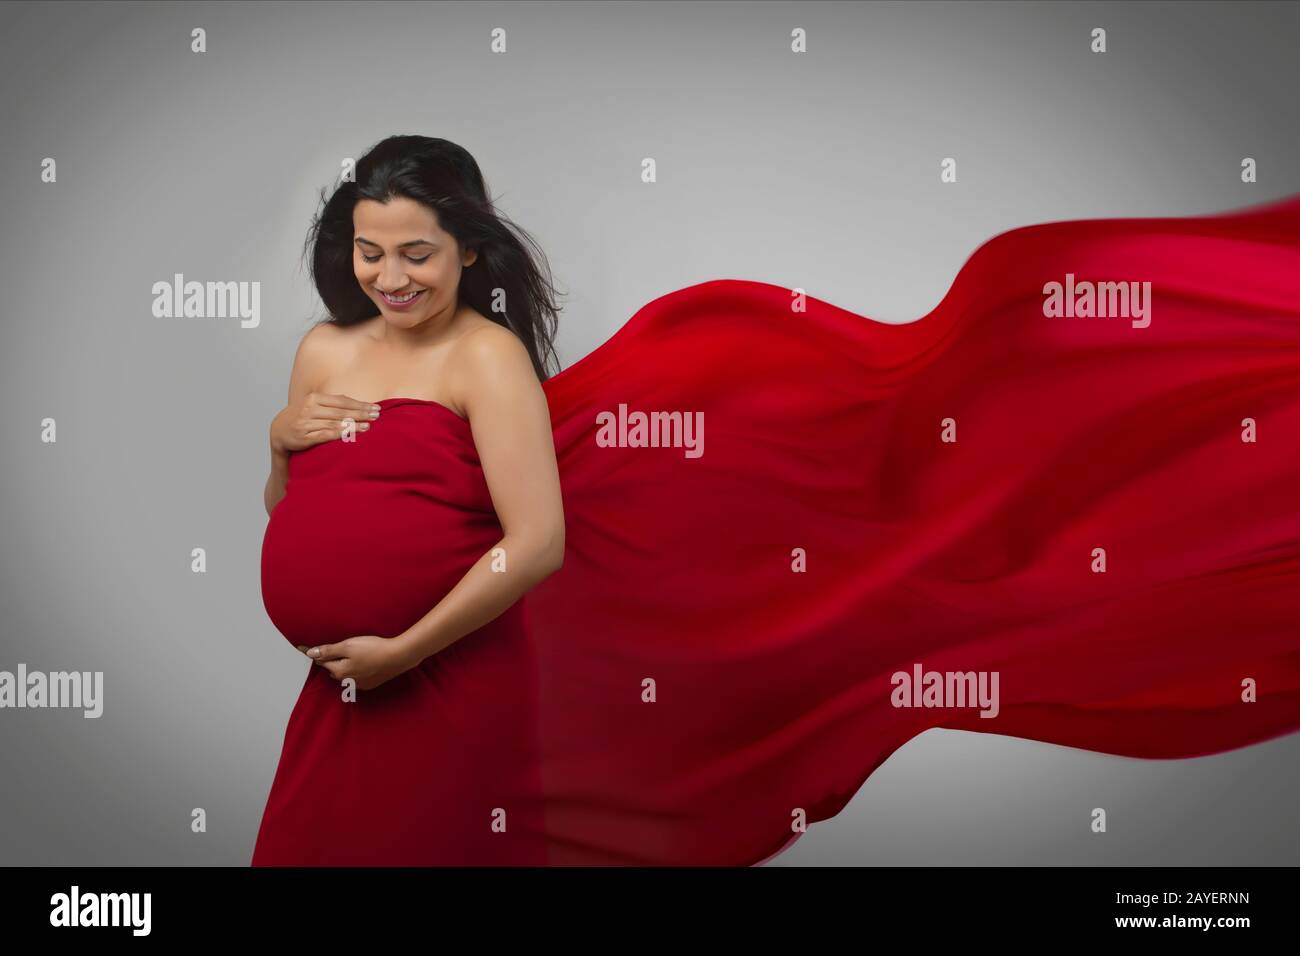 Pregnant woman with hands on her baby bump in a red dress. Stock Photo